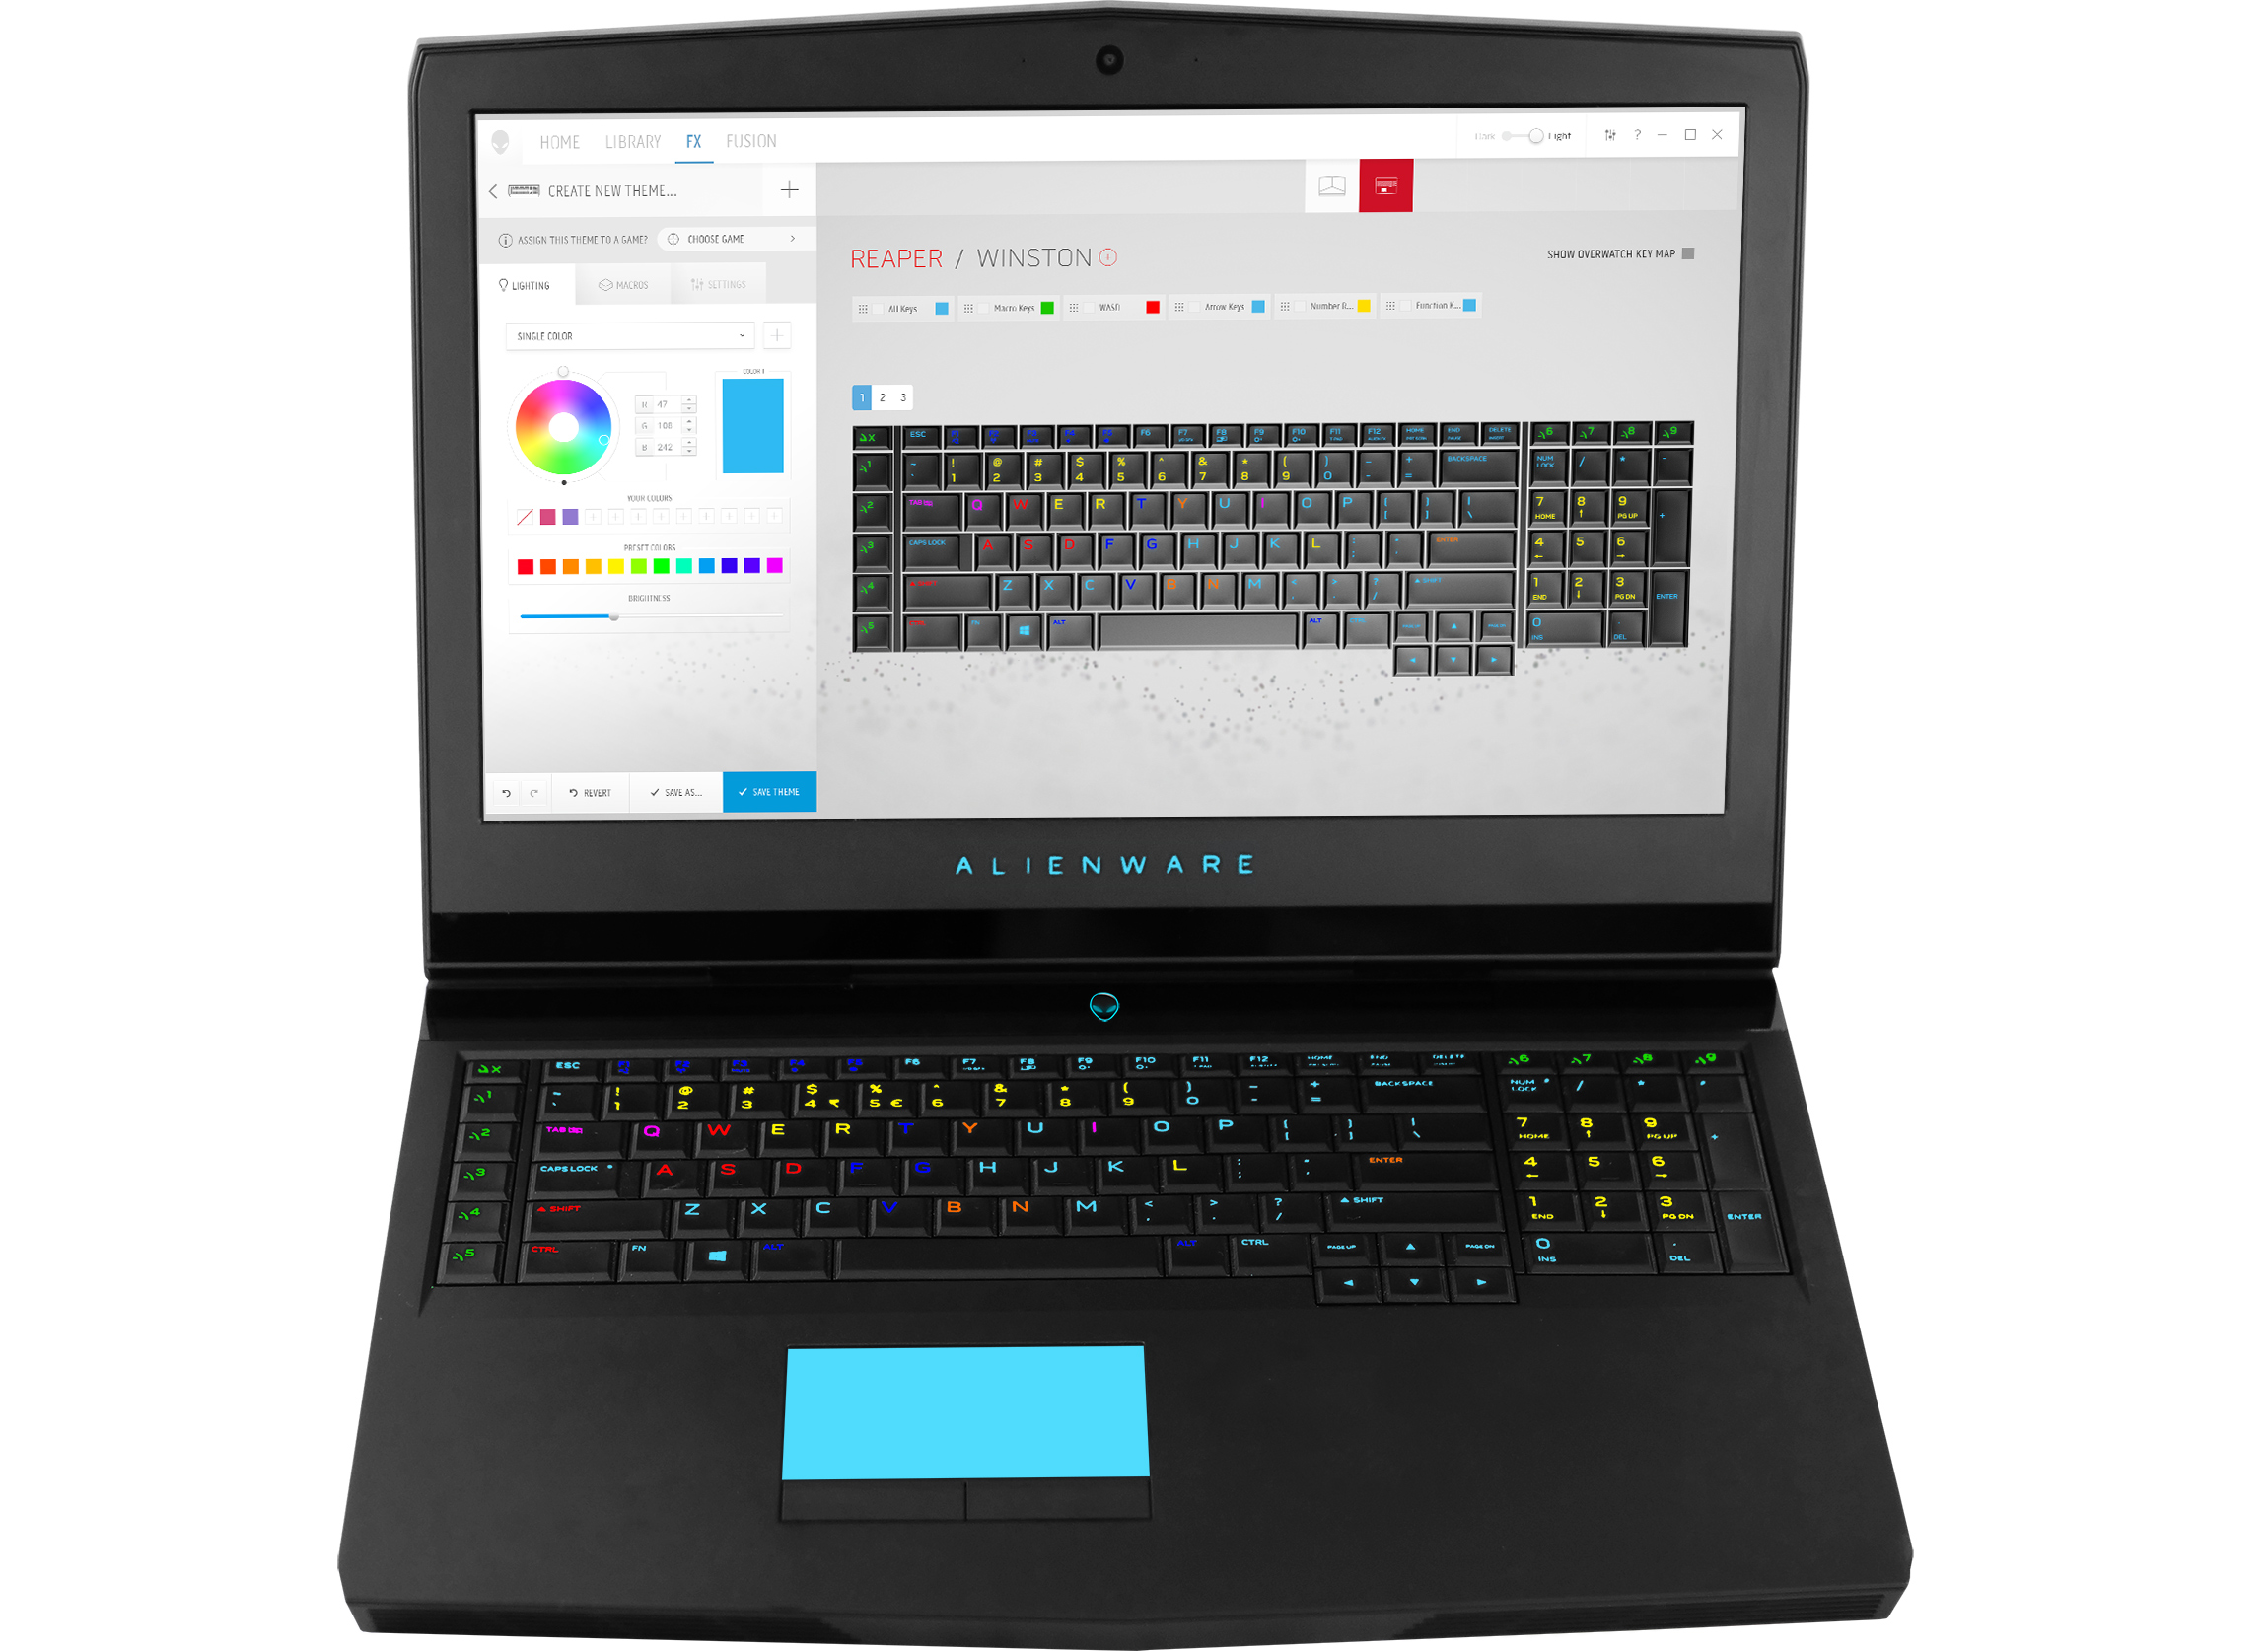 Dell Adds Per Key Led Lighting To Alienware 15 And Alienware 17 Laptops